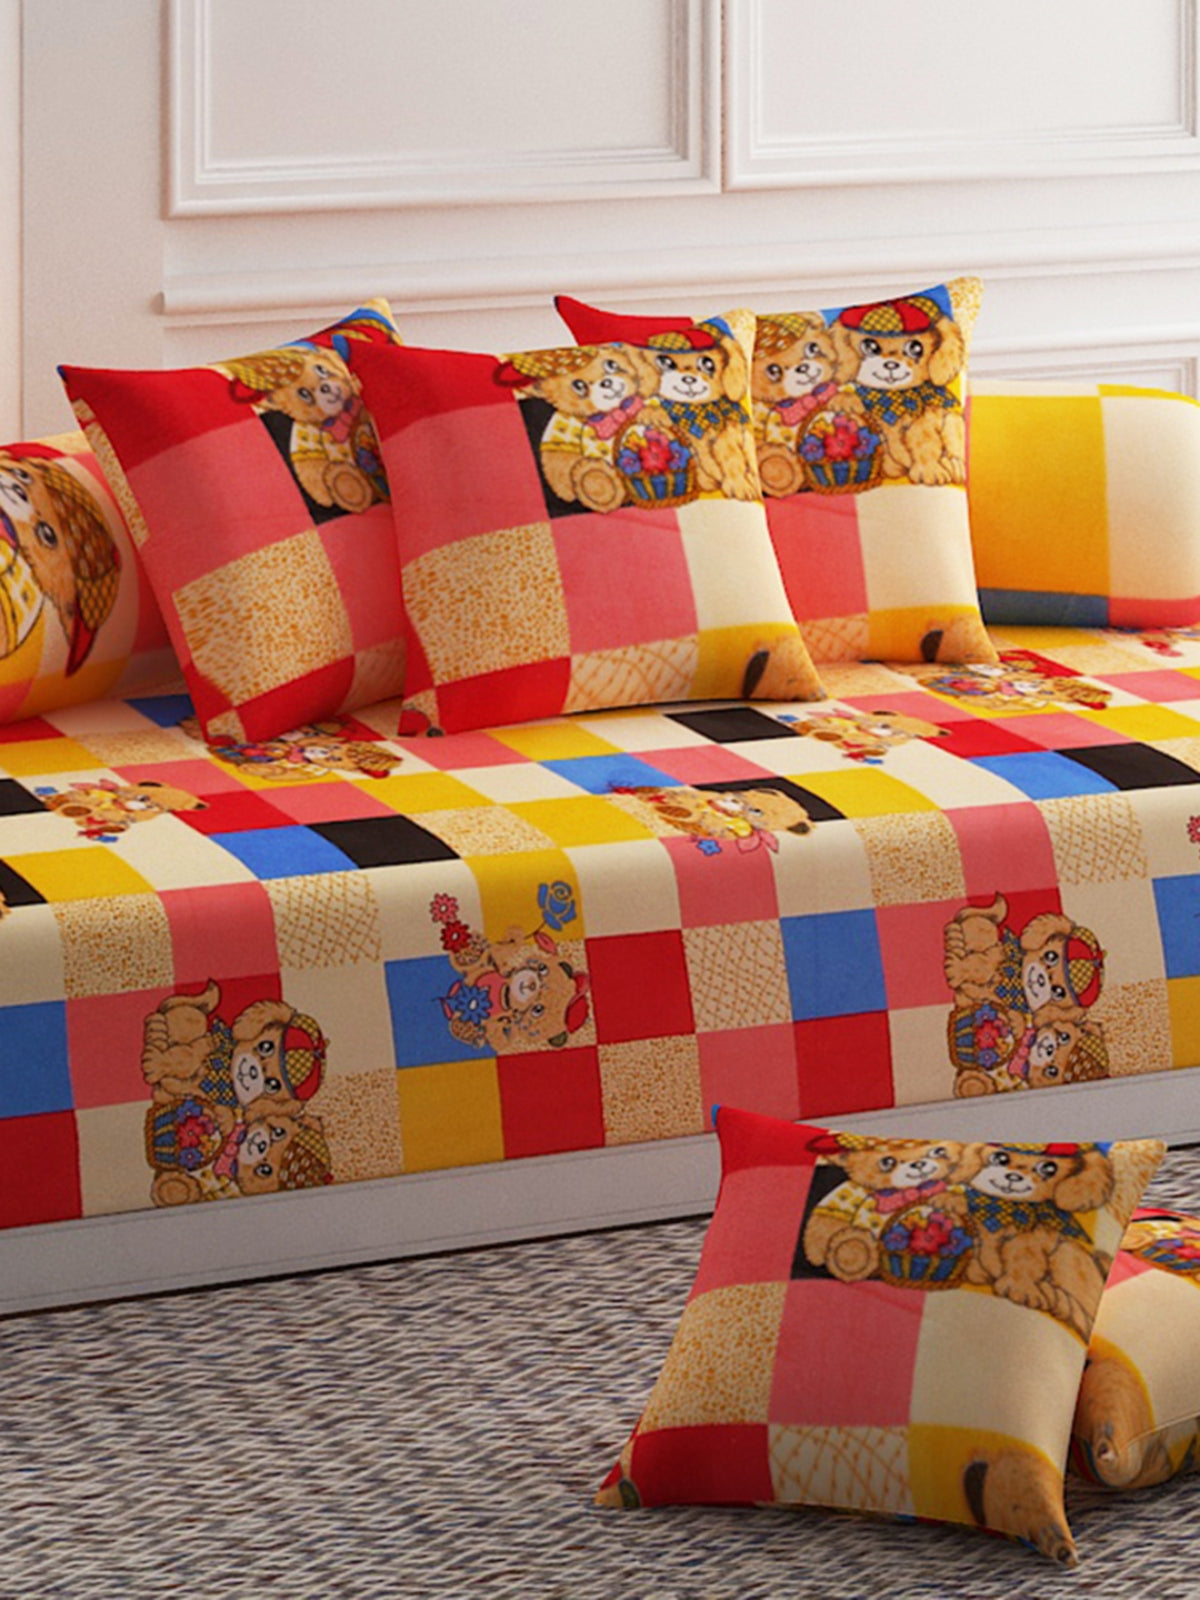 Teddy Printed Diwan Set with Bolster and Cushion Covers - Multicolor